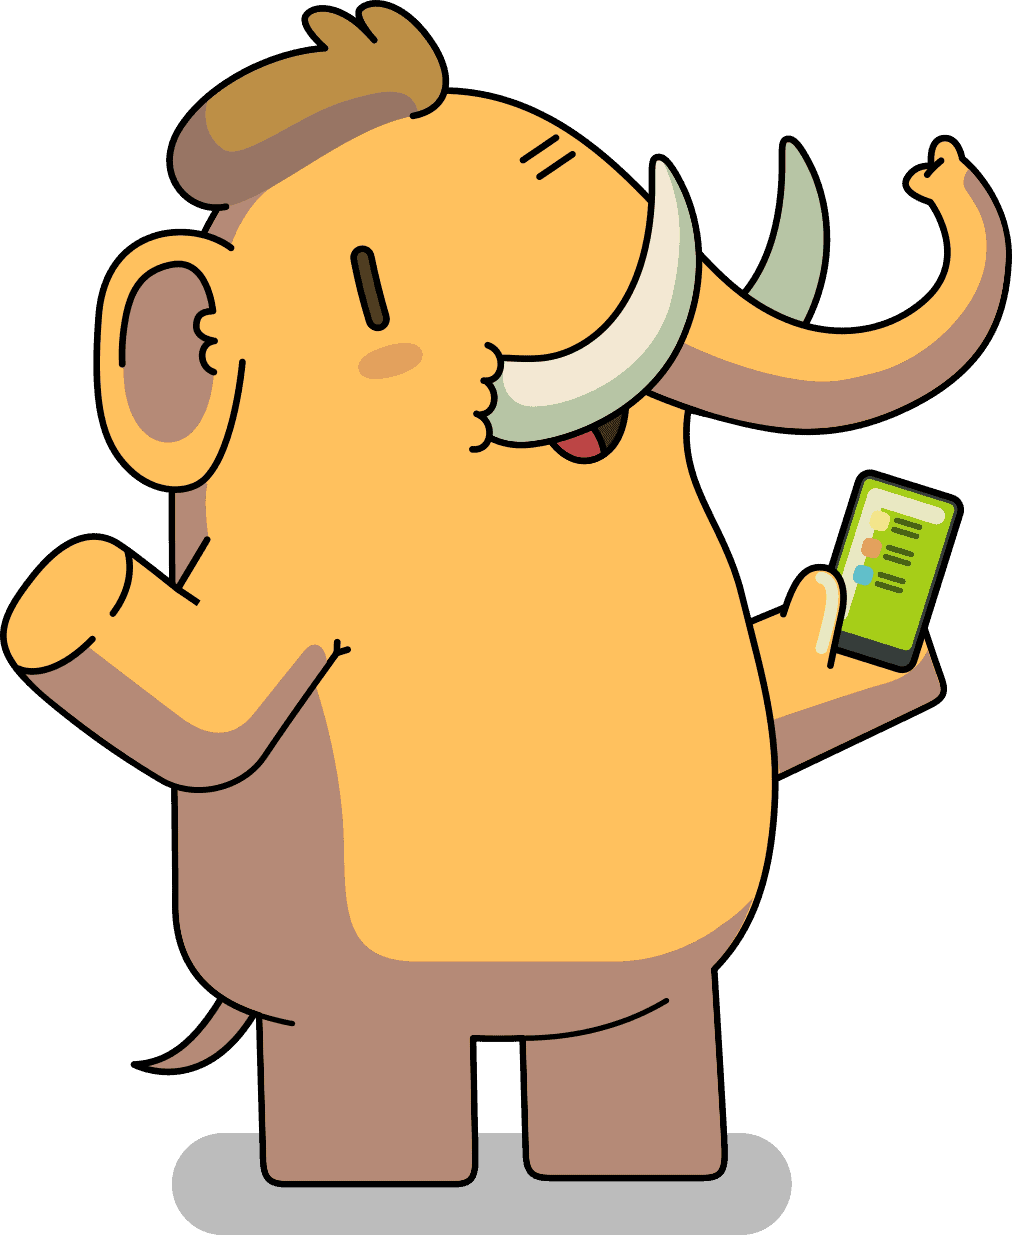 A cartoon of a Mastodon holding a smart phone and winking